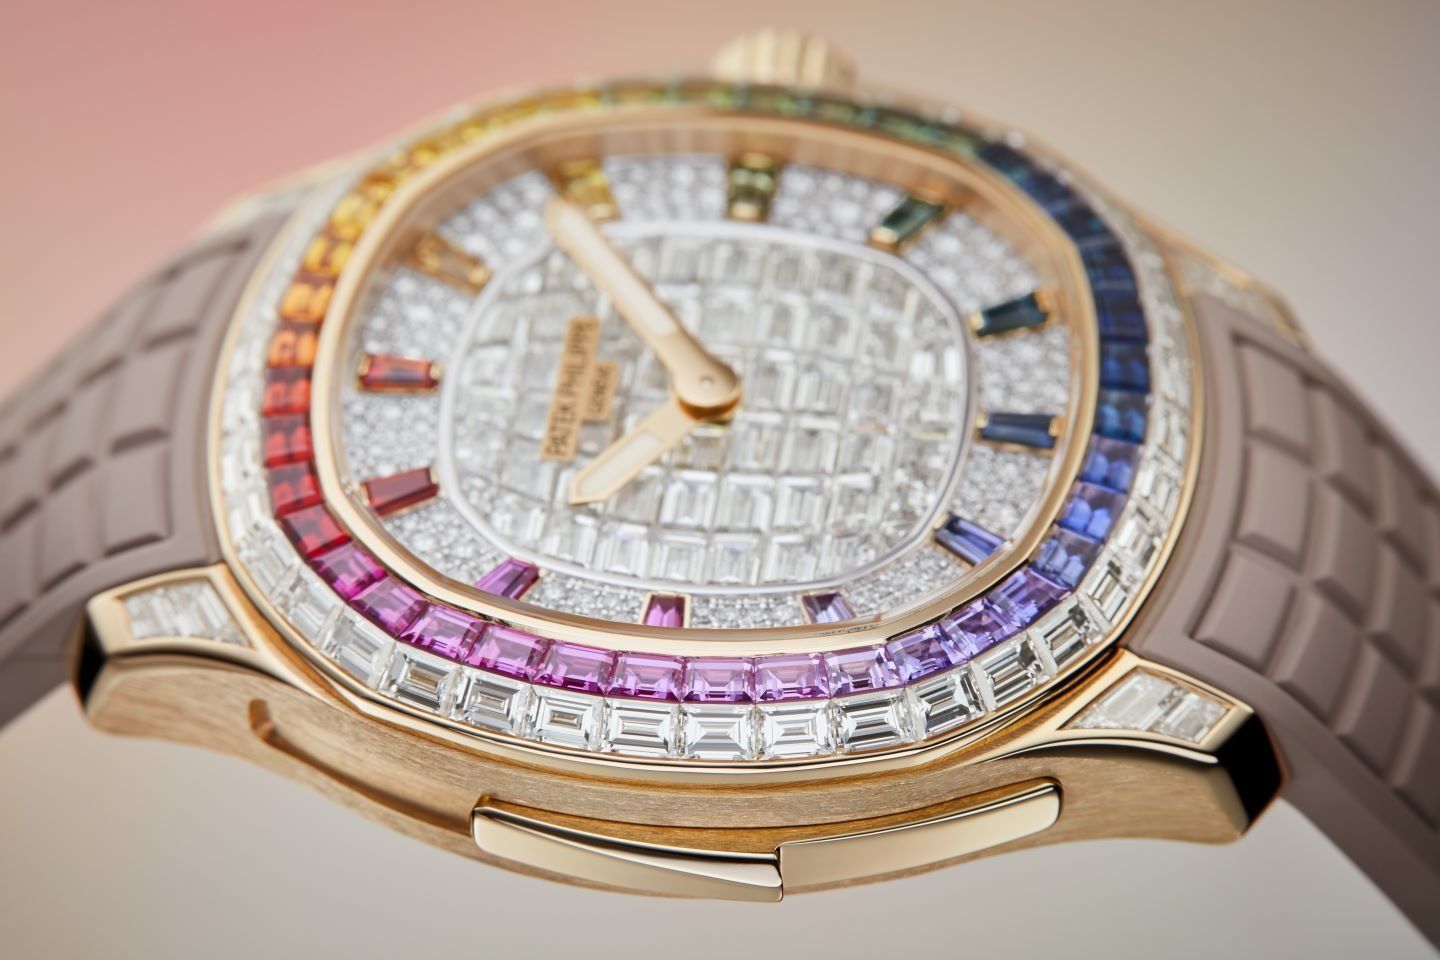 Patek Philippe: 52 baguette sapphires in an alluring color gradient with diamonds, while an even more dazzling salon edition features over 800 multicolored baguette. 